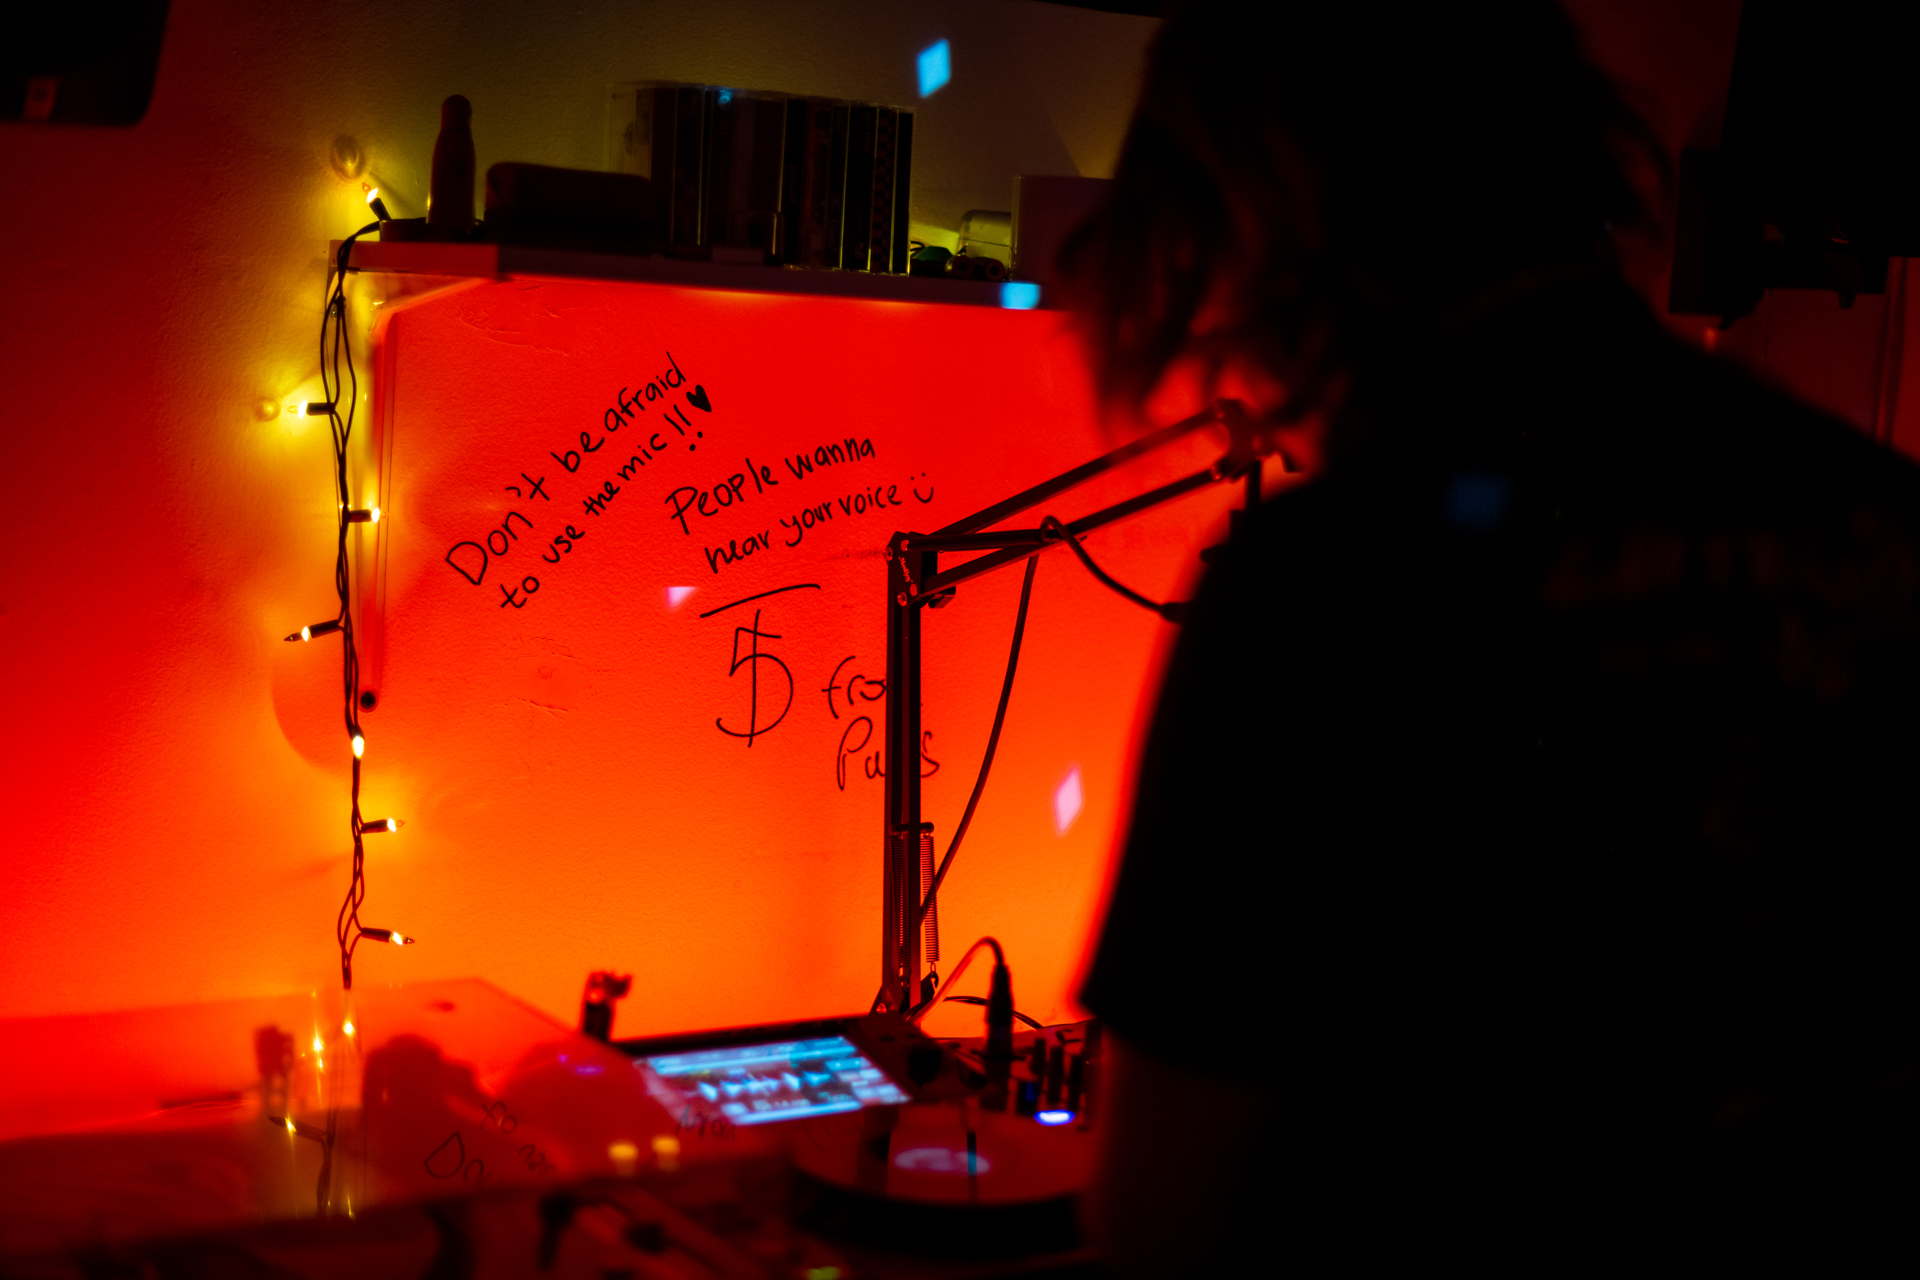 Writing on red-lit wall reads "Don't be afraid to use the mic!! People wanna hear your voice"